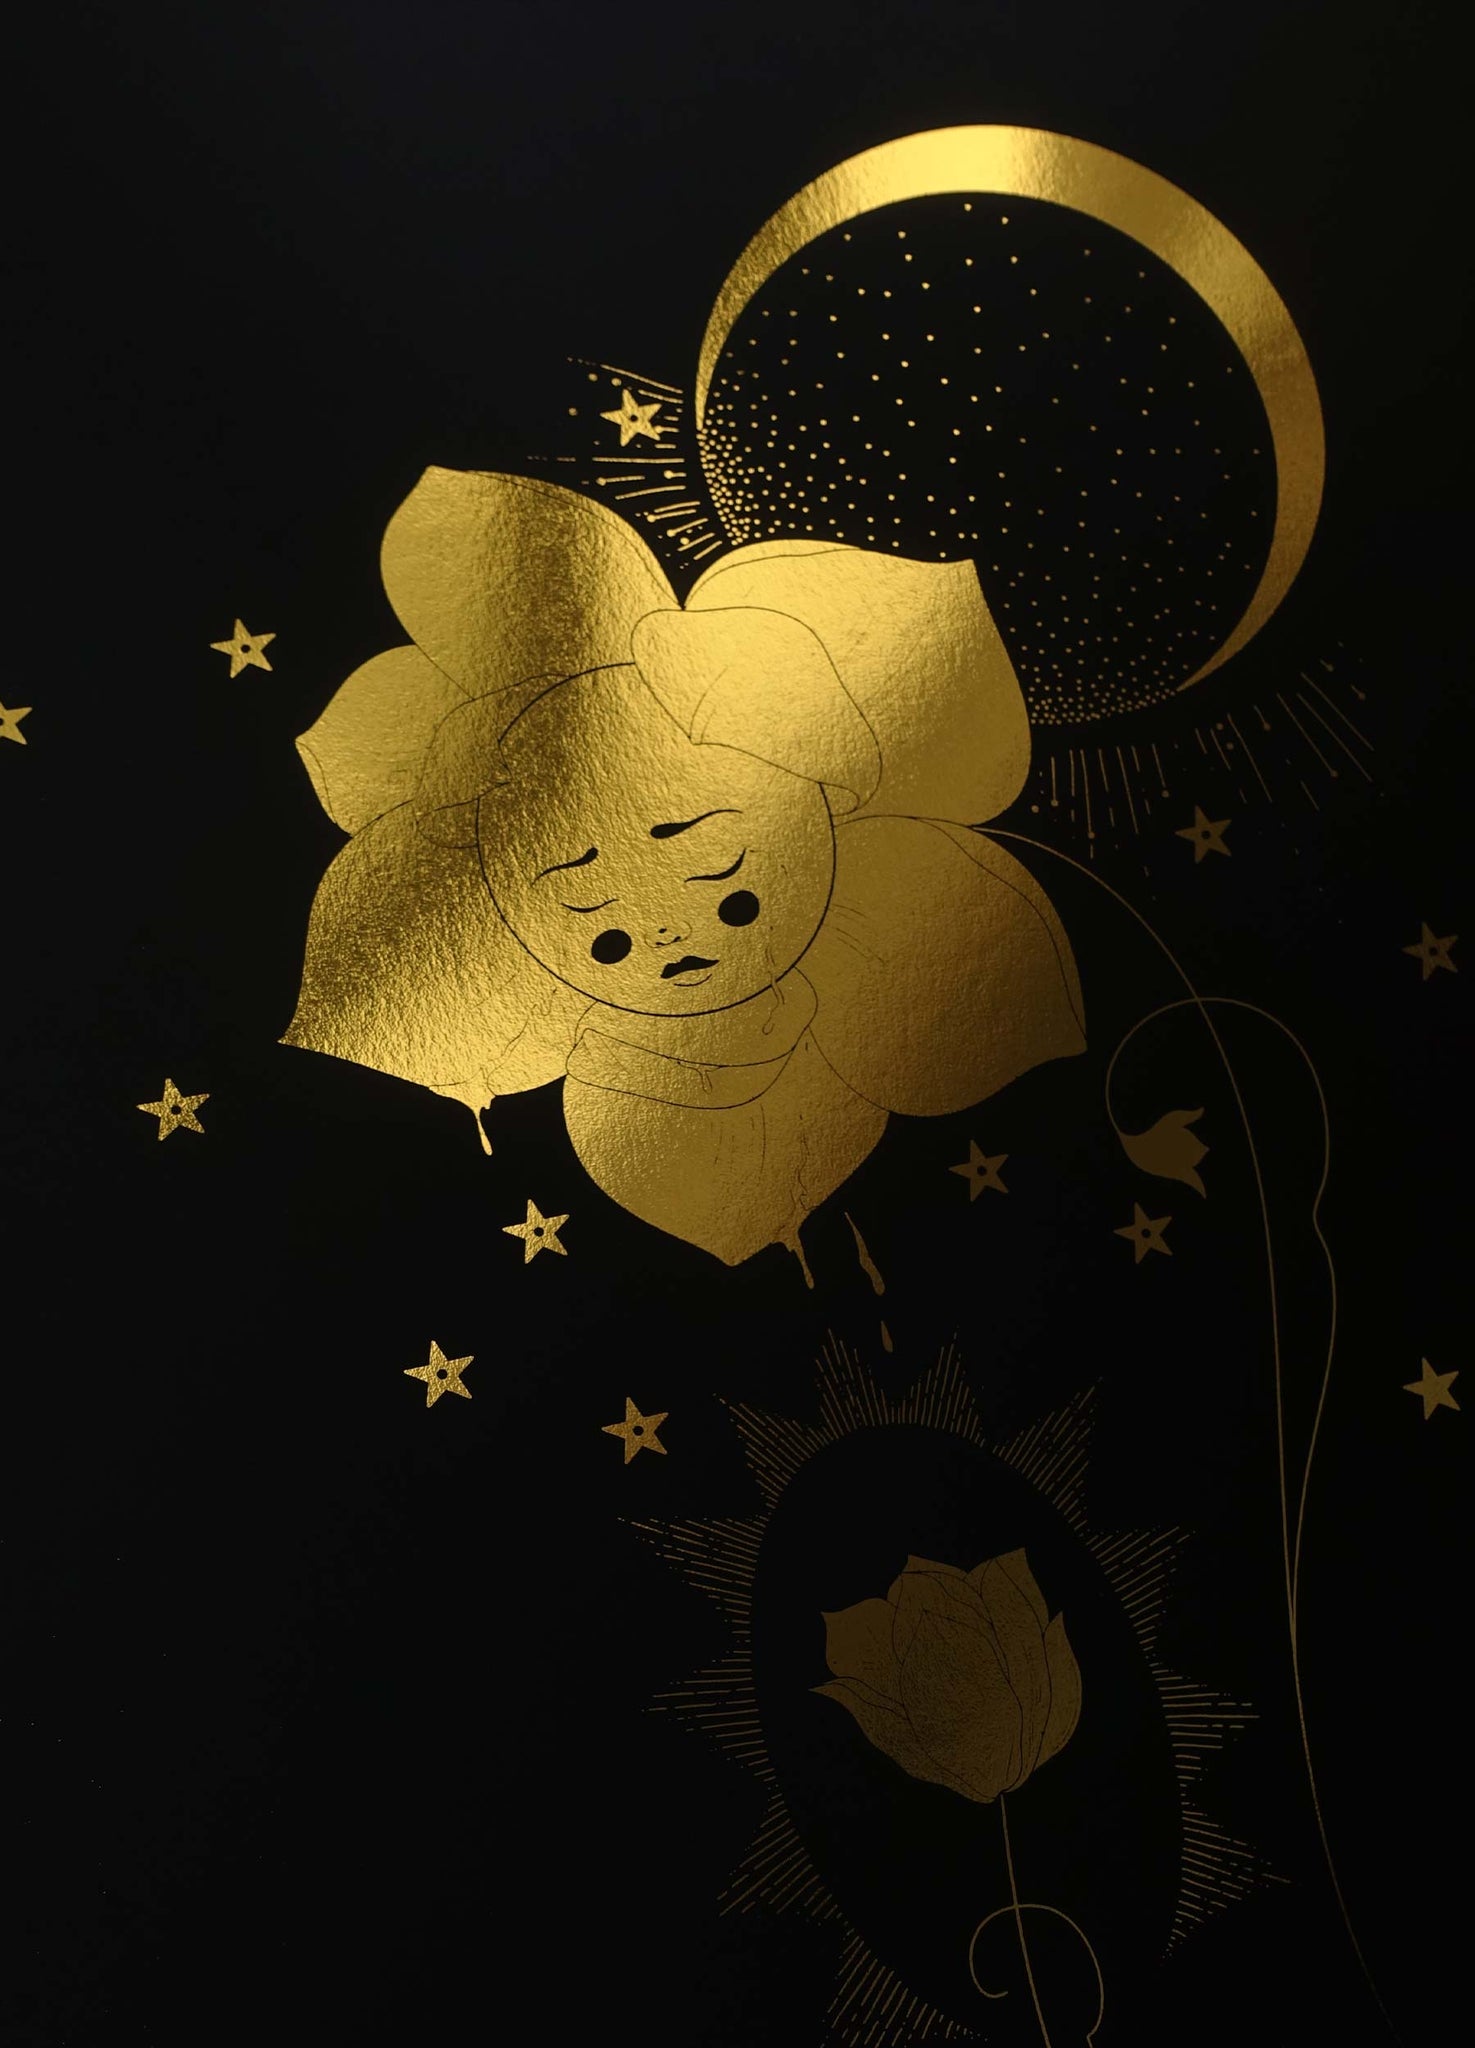 Healing flower gold foil art print on black paper by Cocorrina & Co